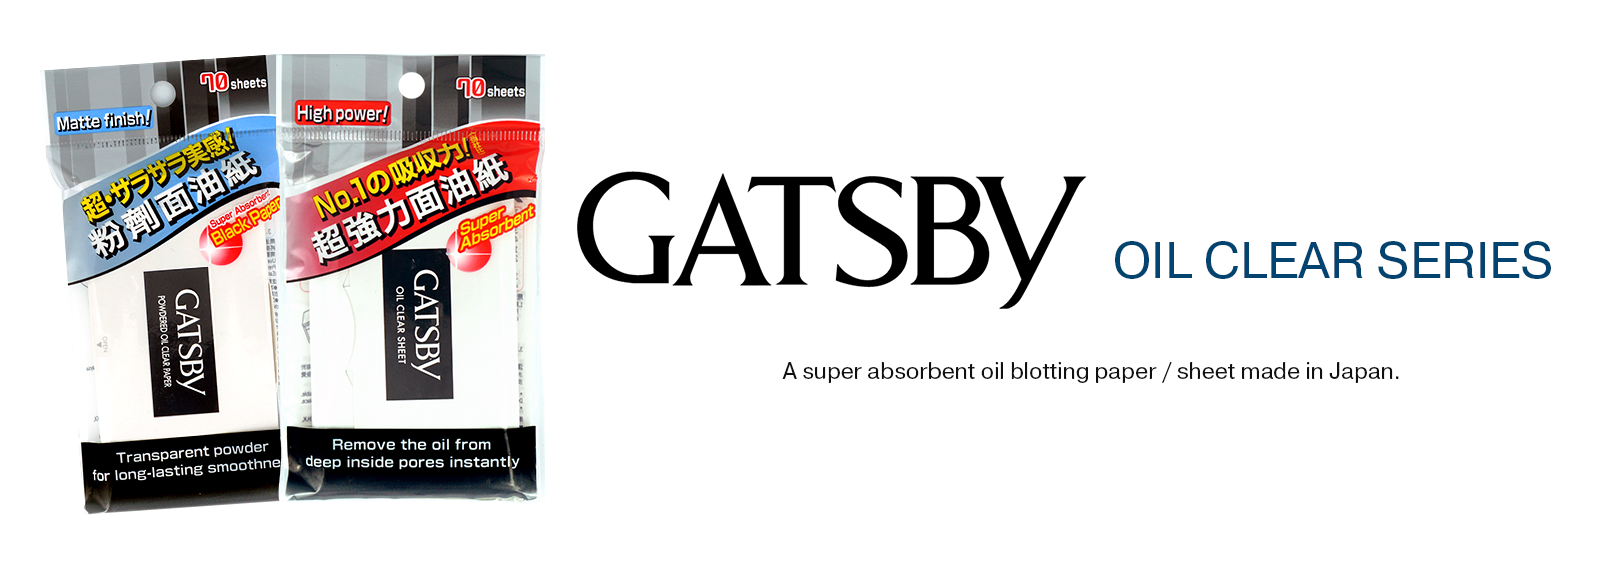 GATSBY Oil Clear Paper Banner